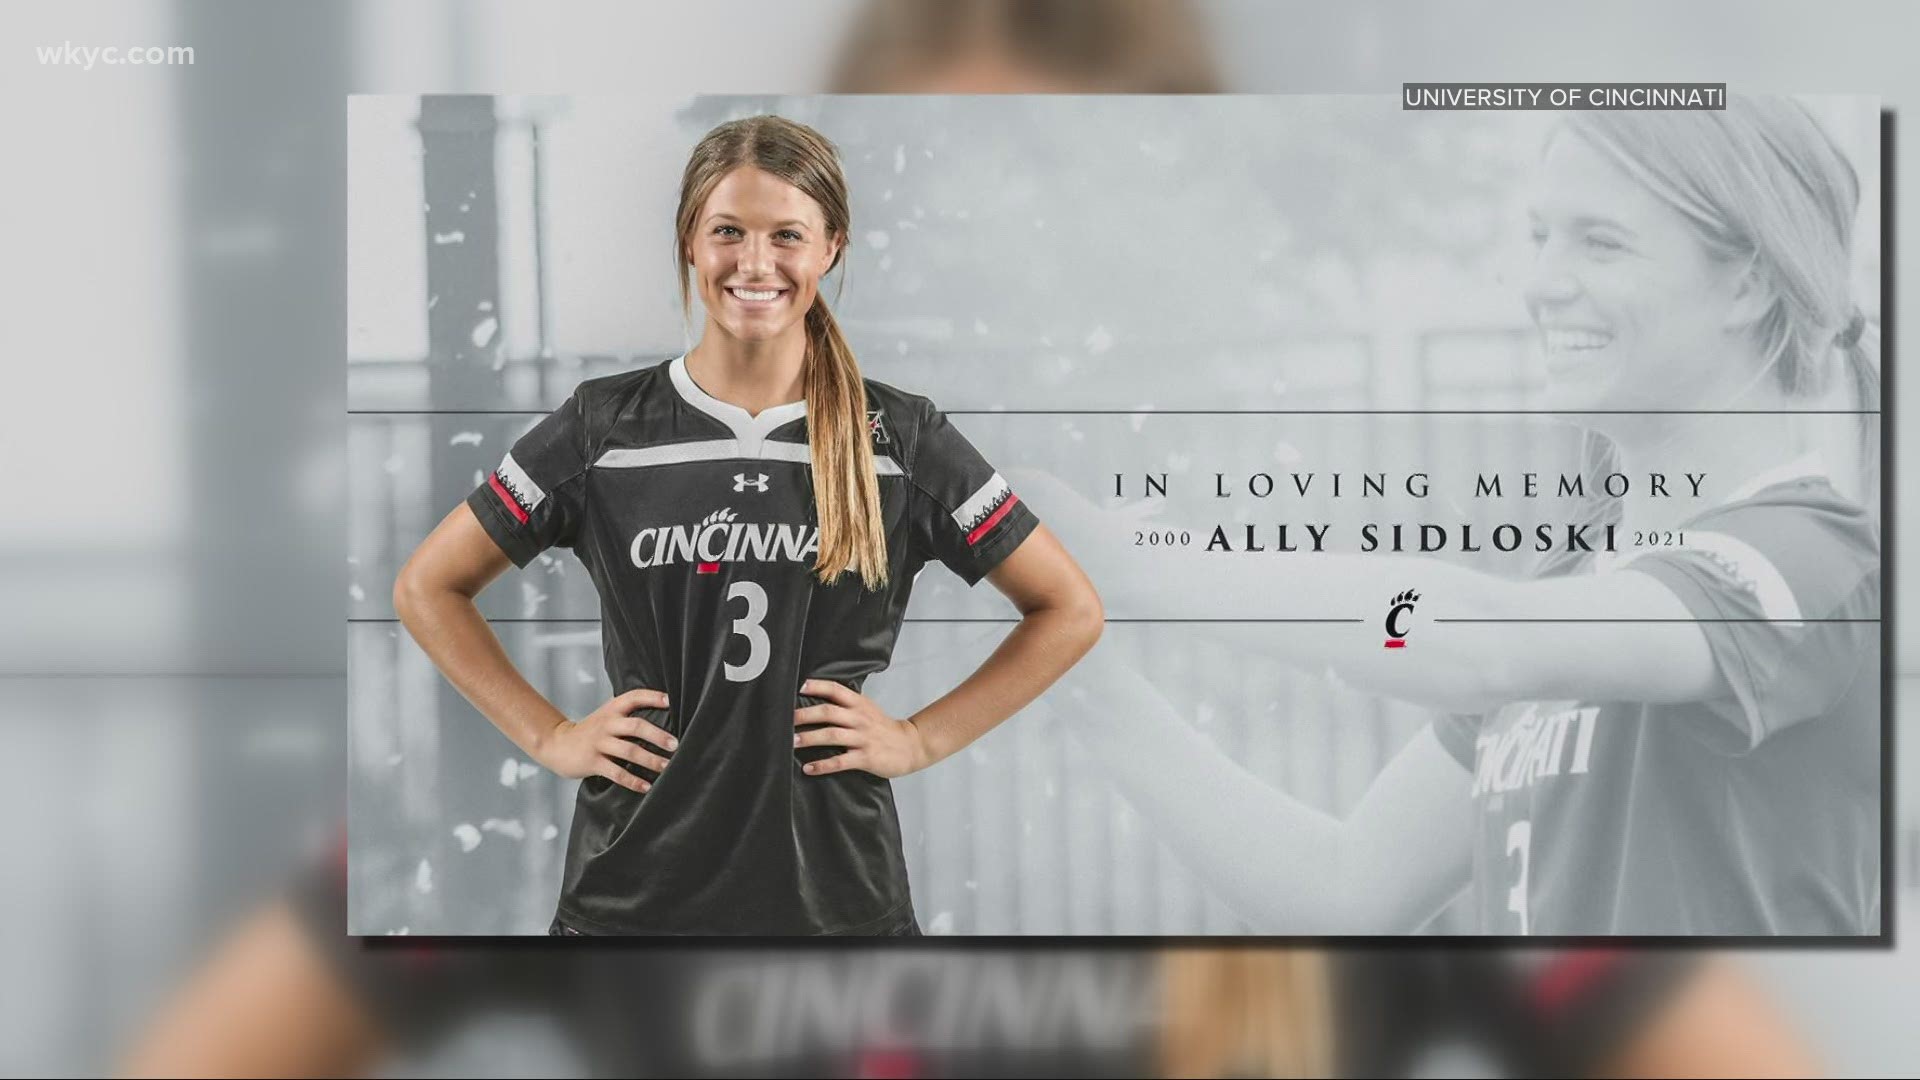 21-year-old Ally Sidloski was confirmed to have been the drowning victim pulled from East Fork Lake in Cincinnati on Saturday. Sidloski was a Northeast Ohio native.